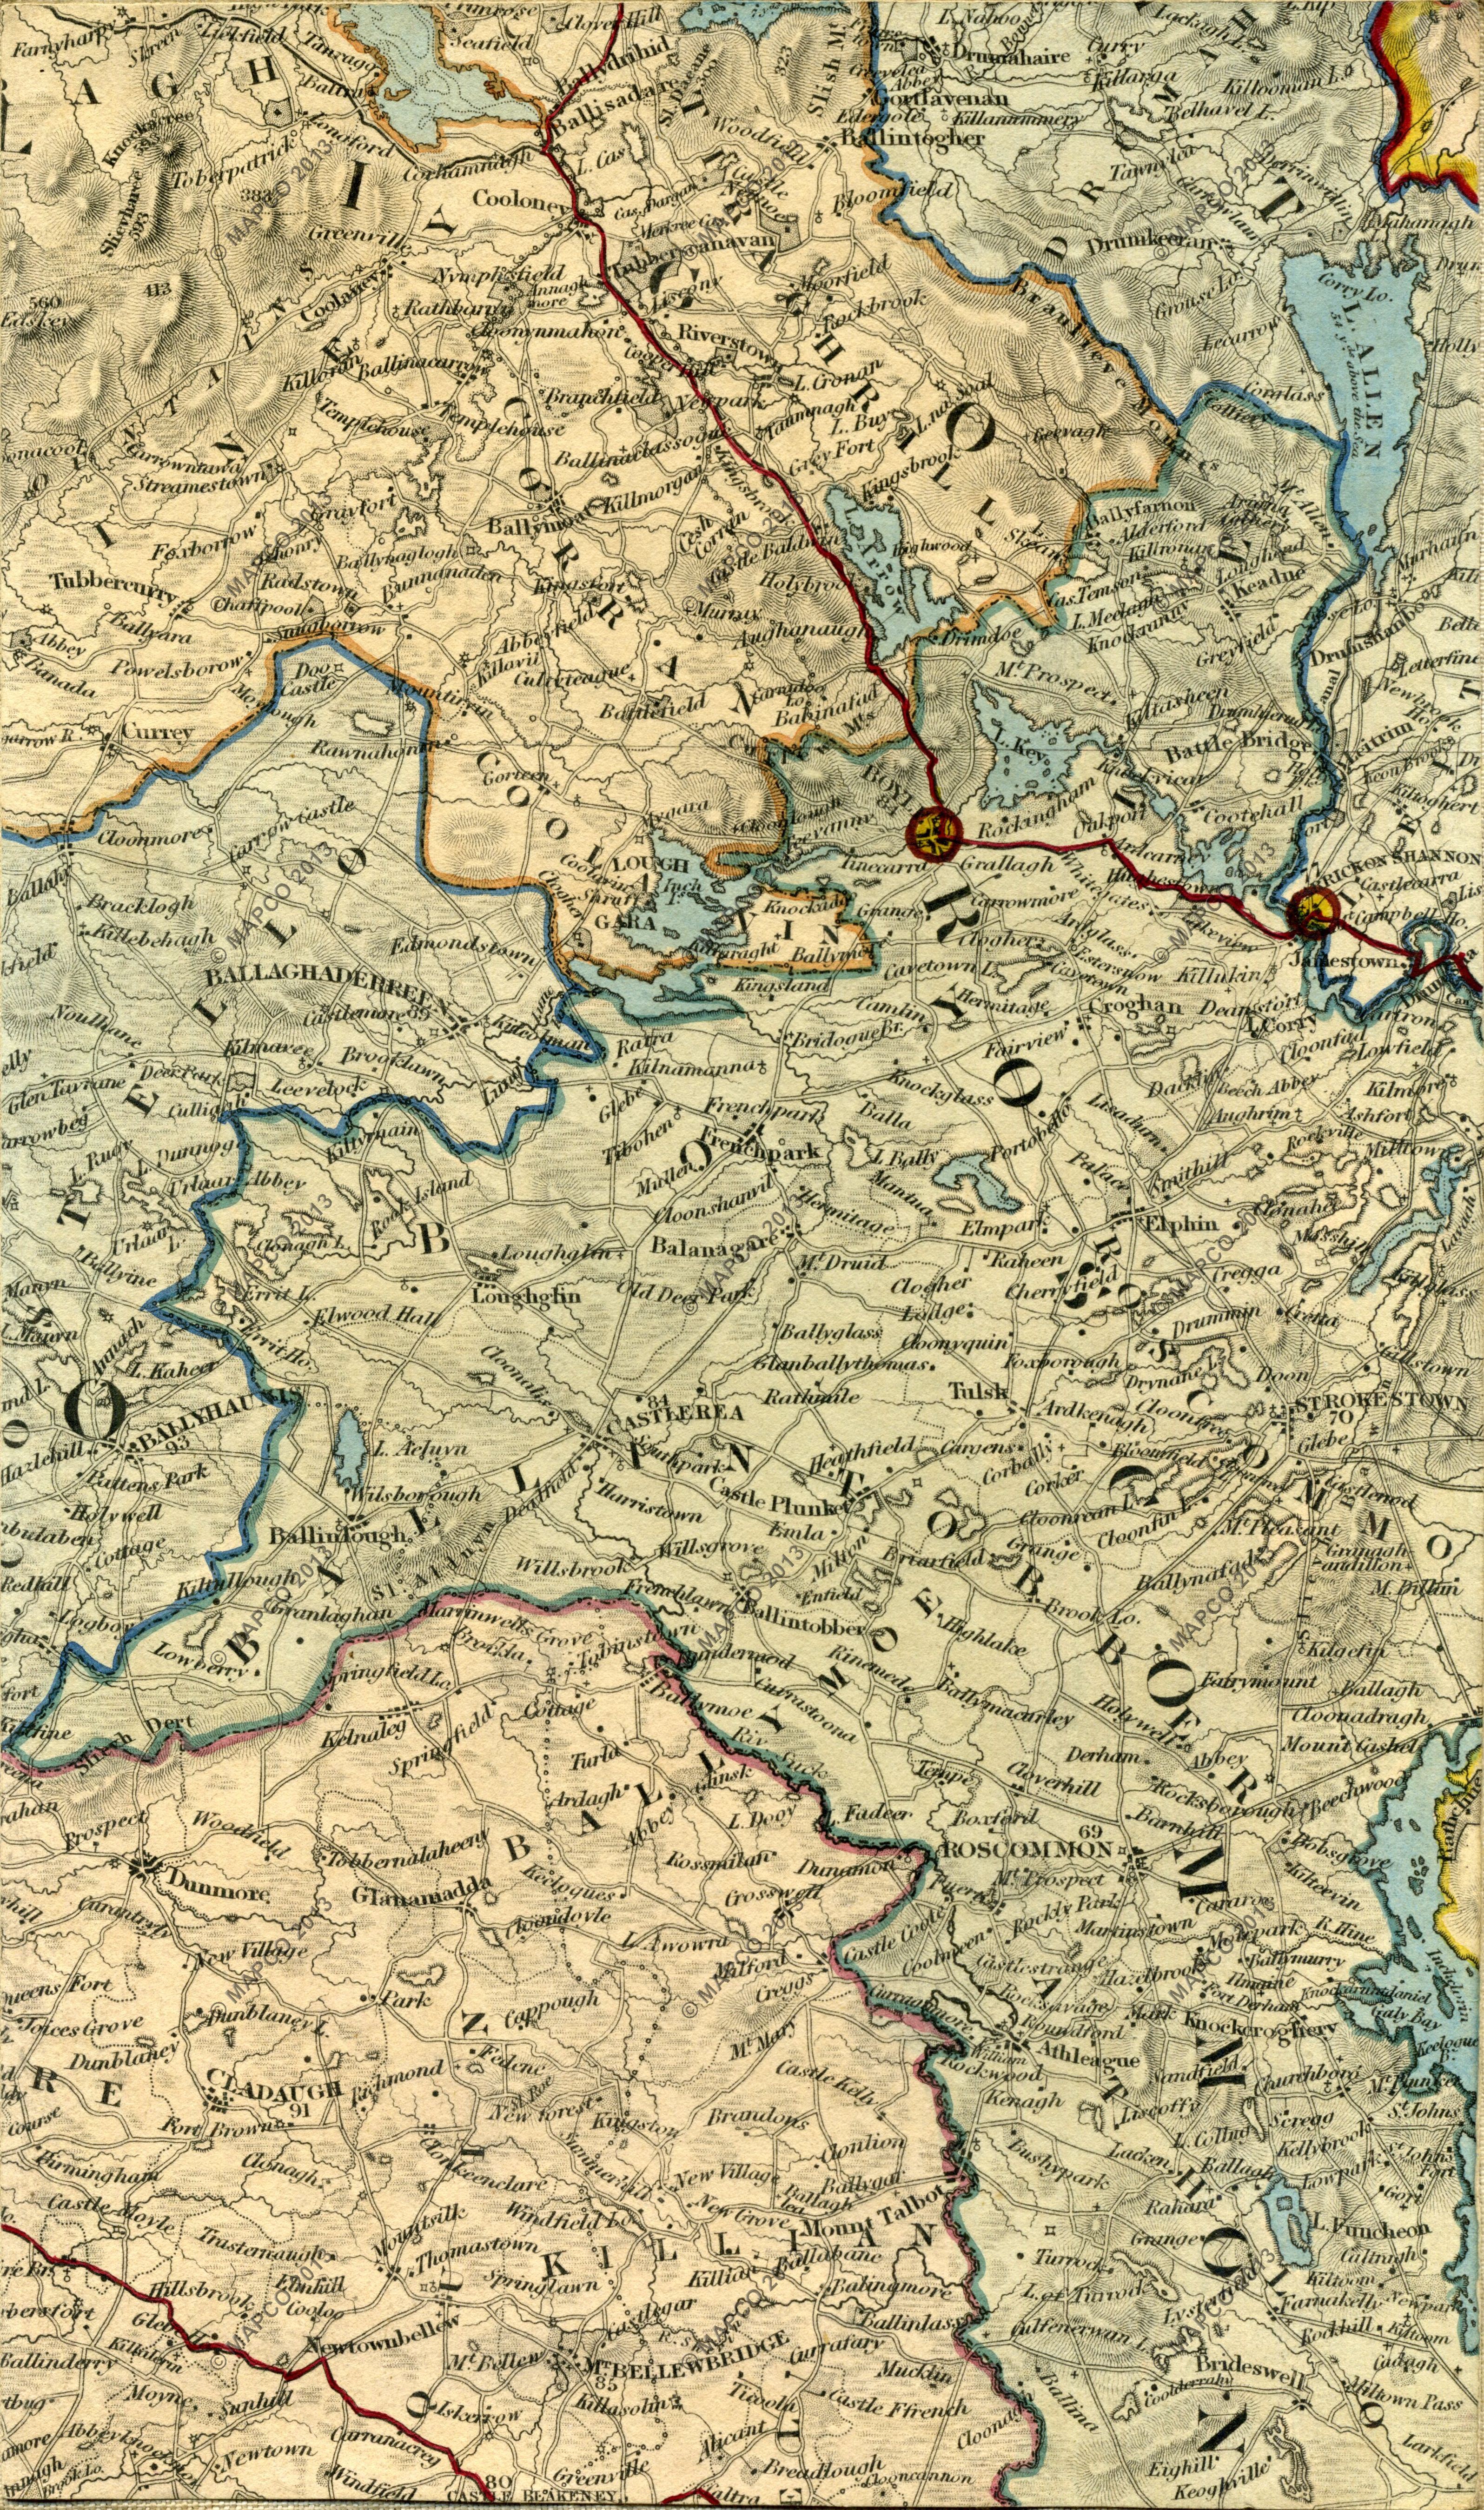 Return To Previous Map Image